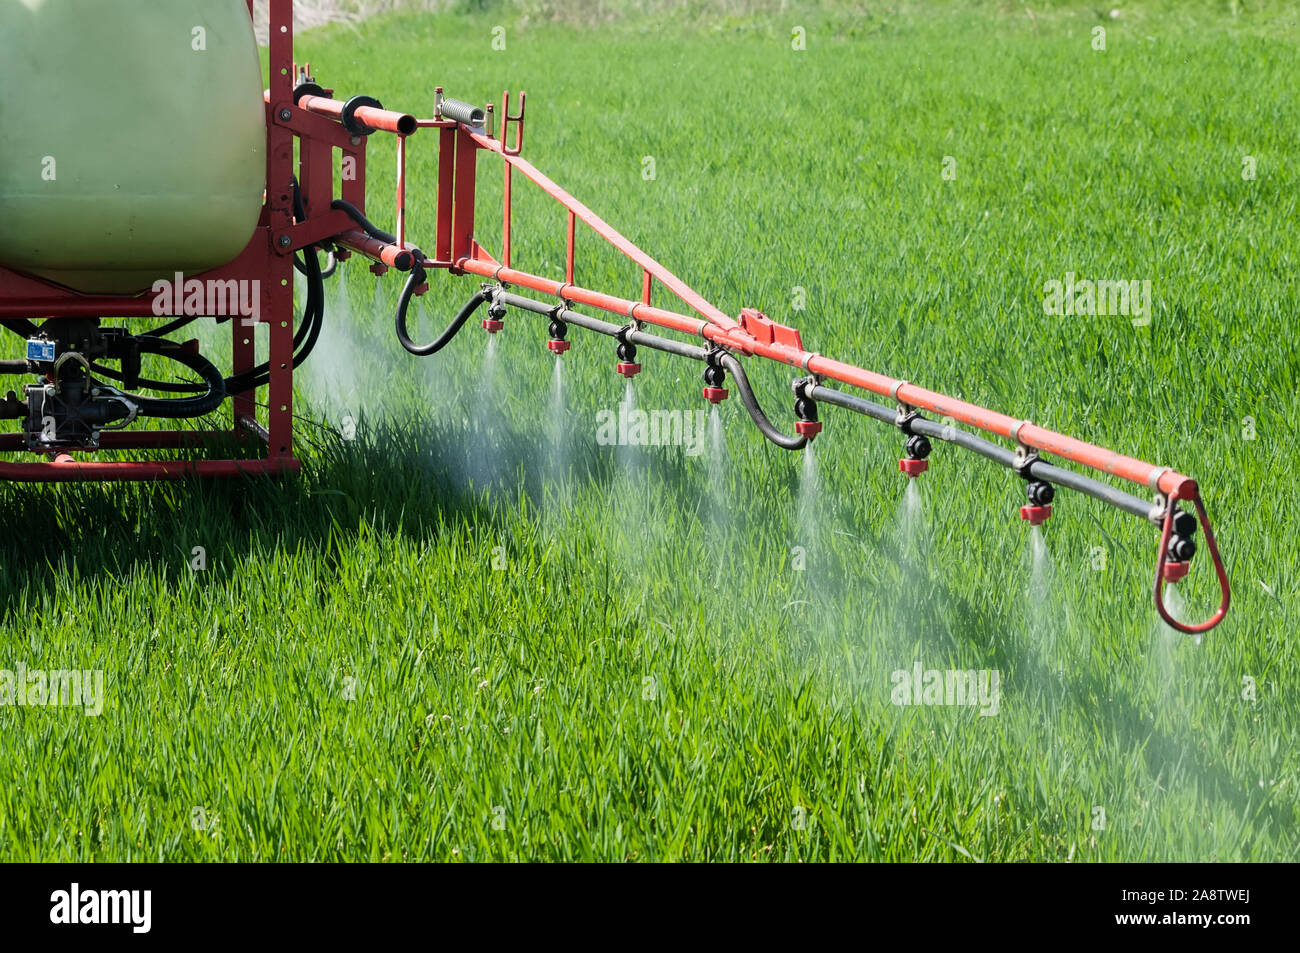 Tractor spraying herbicide over wheat field with sprayer. Agriculture, farming, GMO, pollution, contamination and environment concepts Stock Photo